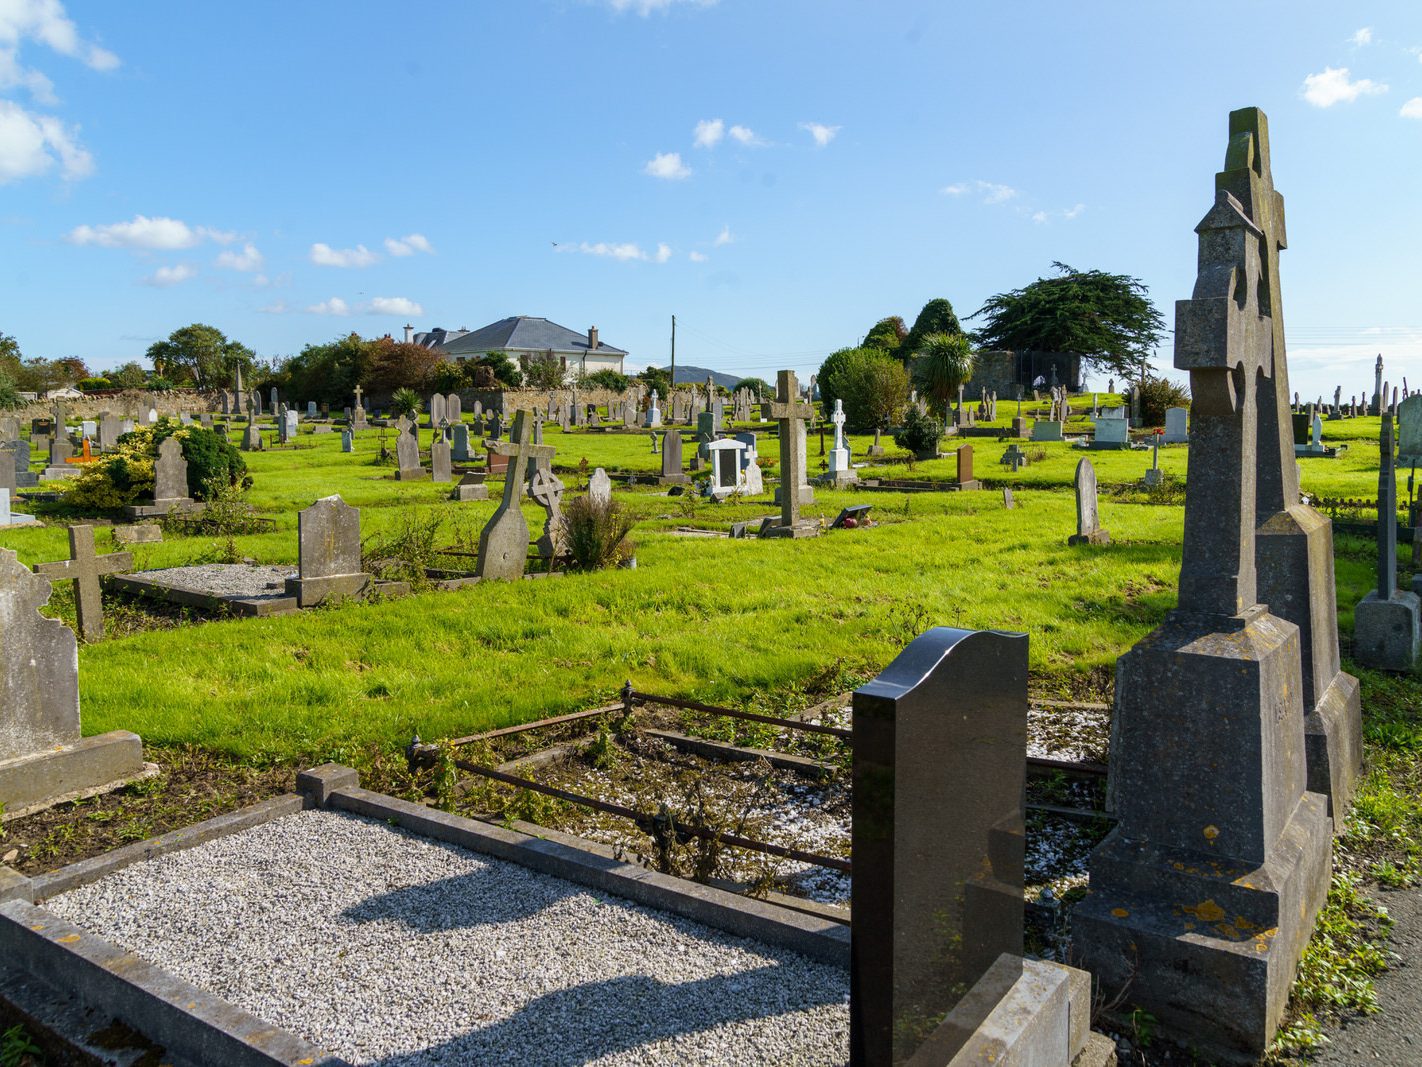 TODAY I MANAGED TO VISIT KILBARRACK CEMETERY [AFTER A NUMBER OF FAILED ATTEMPTS OVER A PERIOD OF TEN YEARS] 037